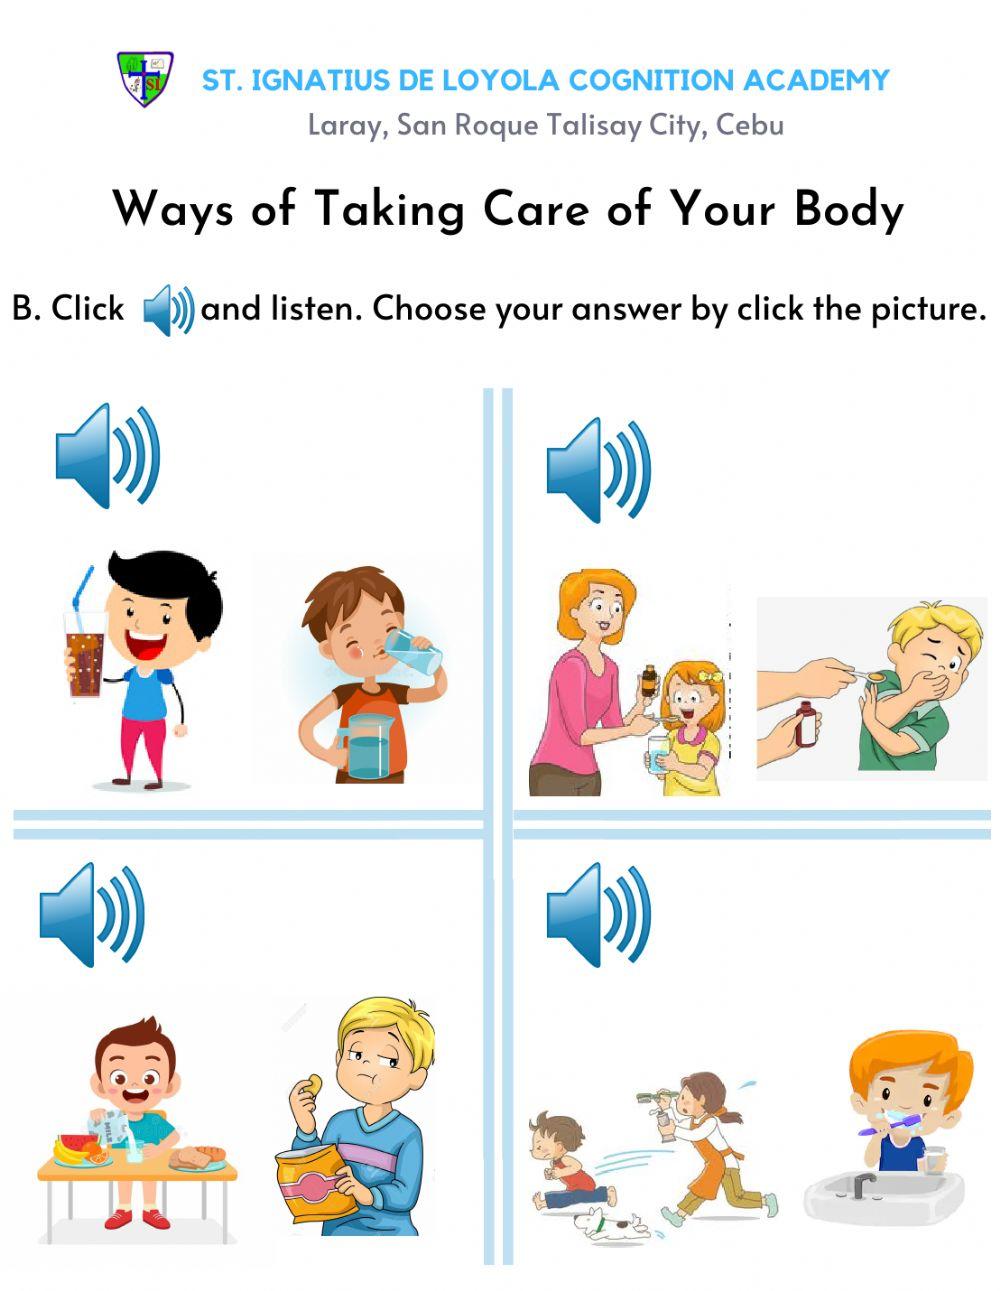 Ways of Taking Care of Your Body